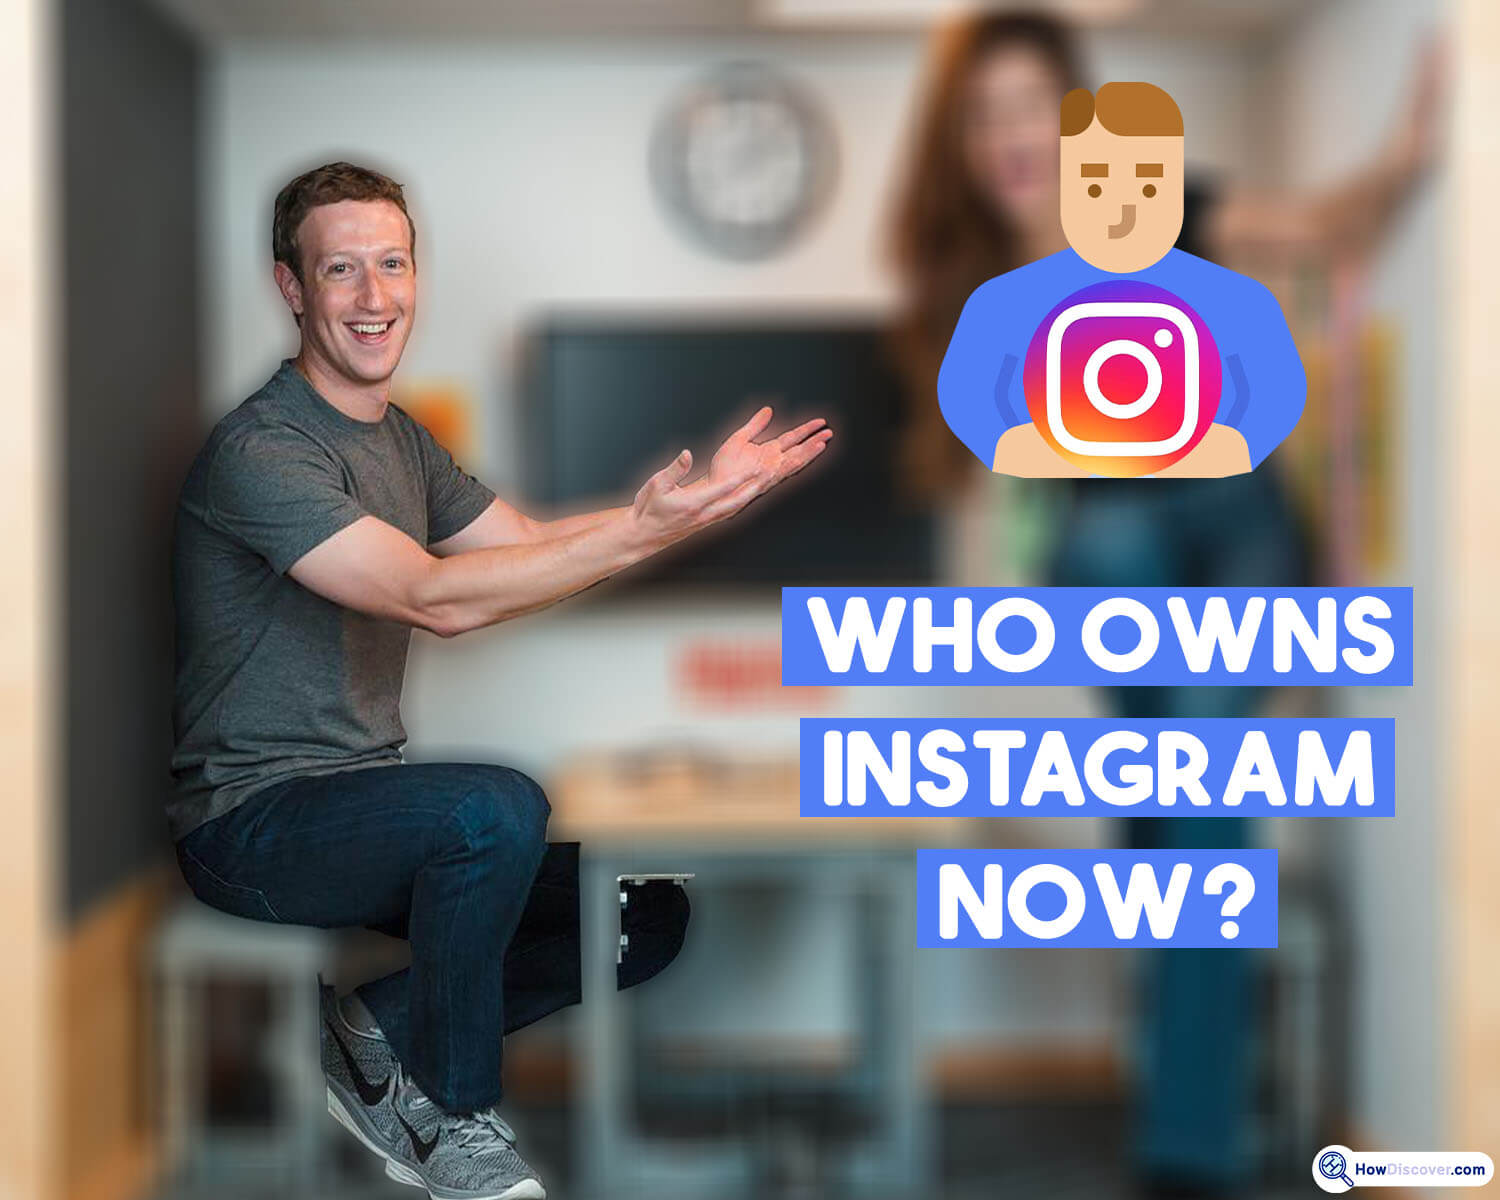 Who owns Instagram Now